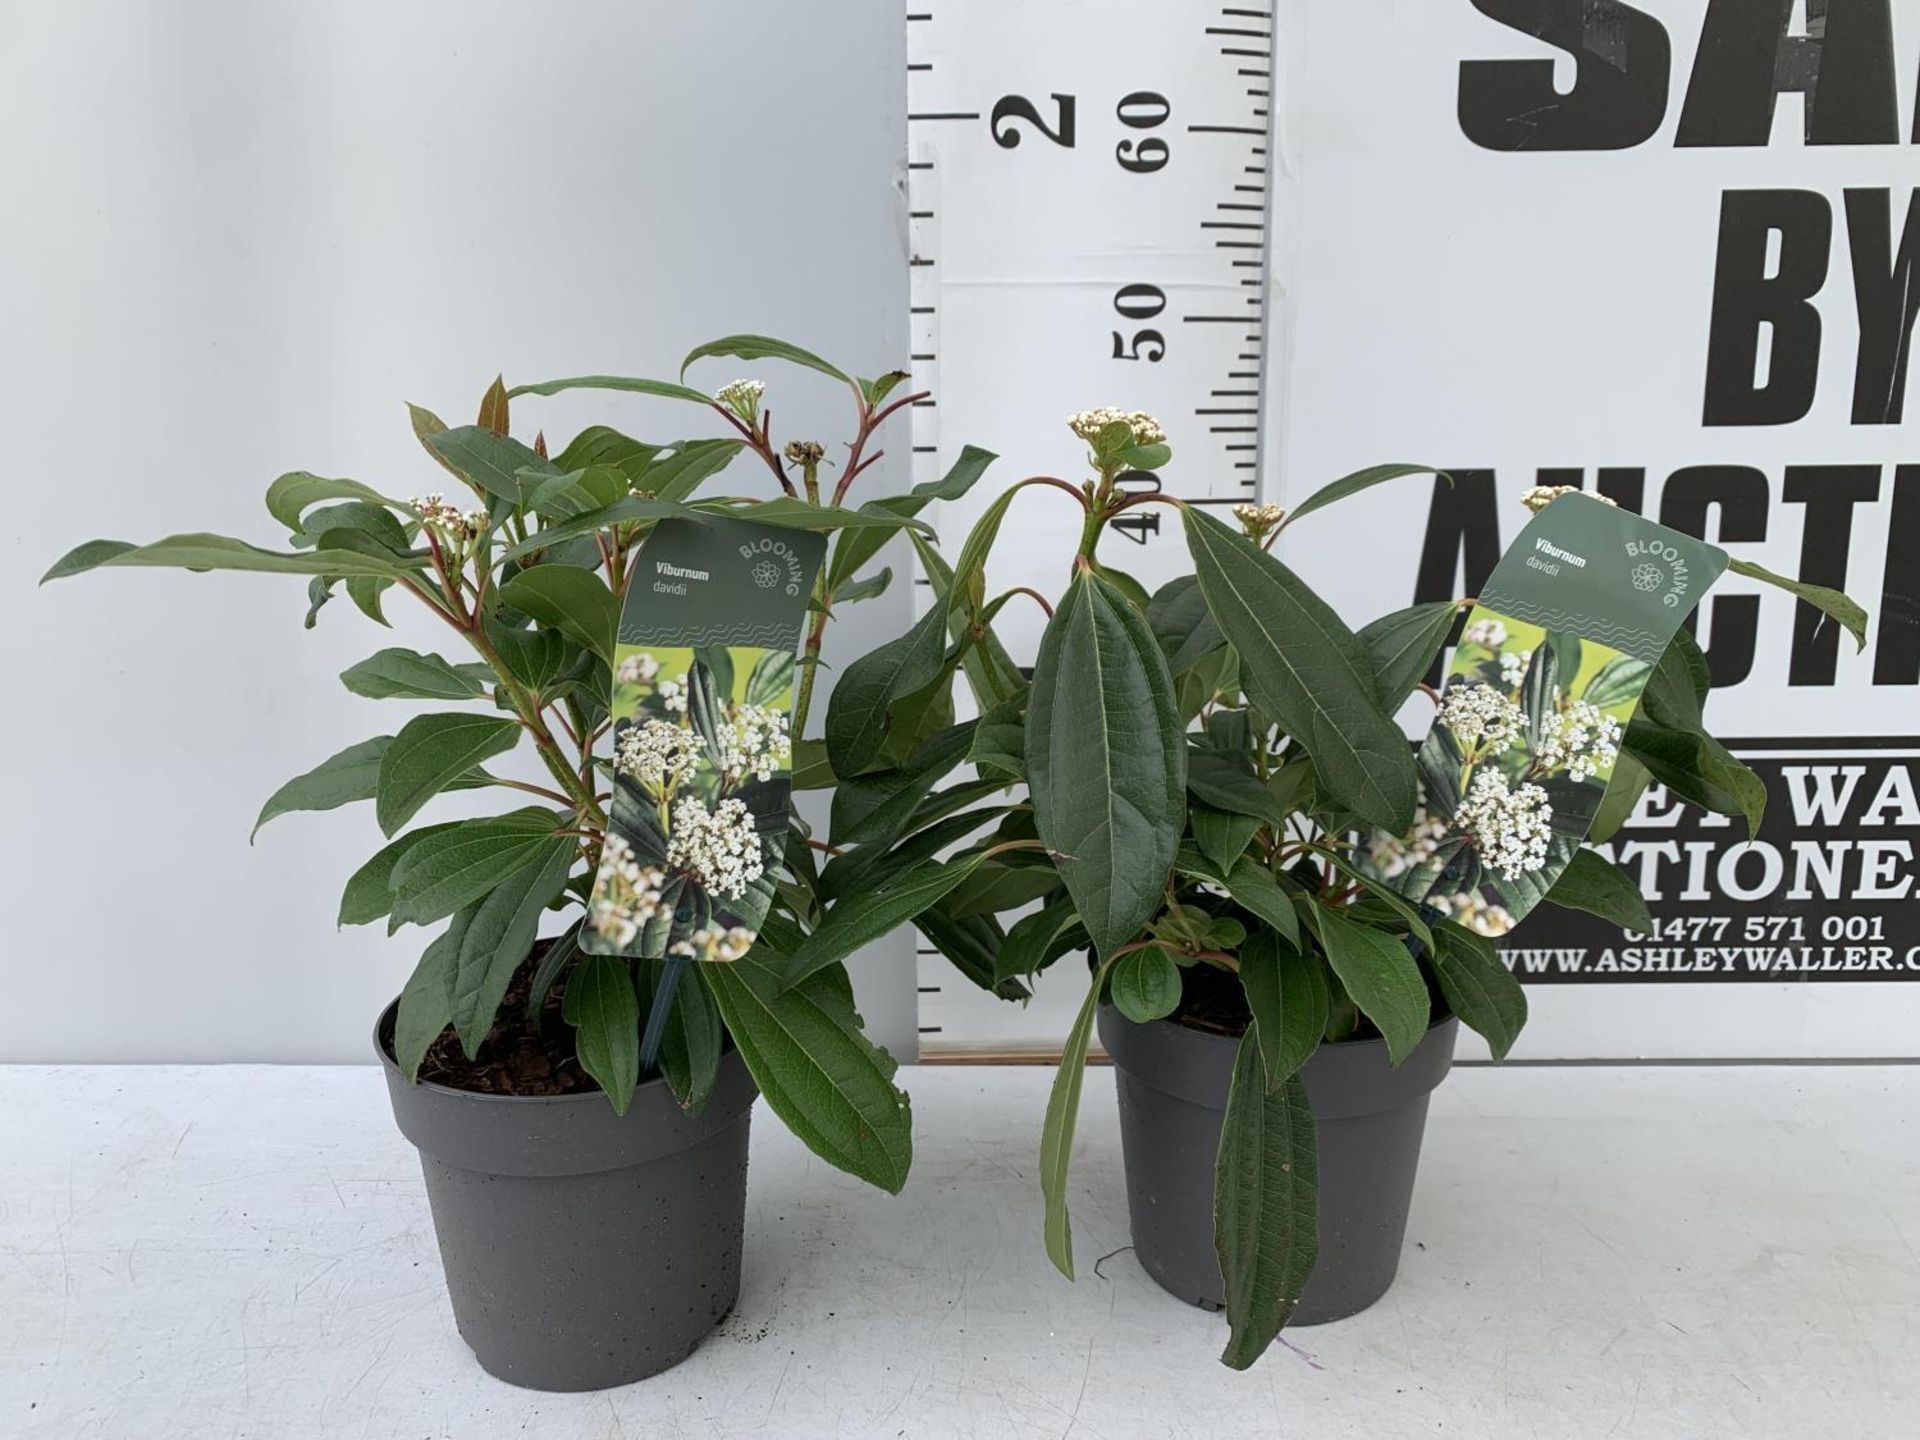 TWO VIBURNUM 'DAVIDII' IN 2 LTR POTS APPROX 45CM IN HEIGHT TO BE SOLD FOR THE TWO PLUS VAT - Image 2 of 8